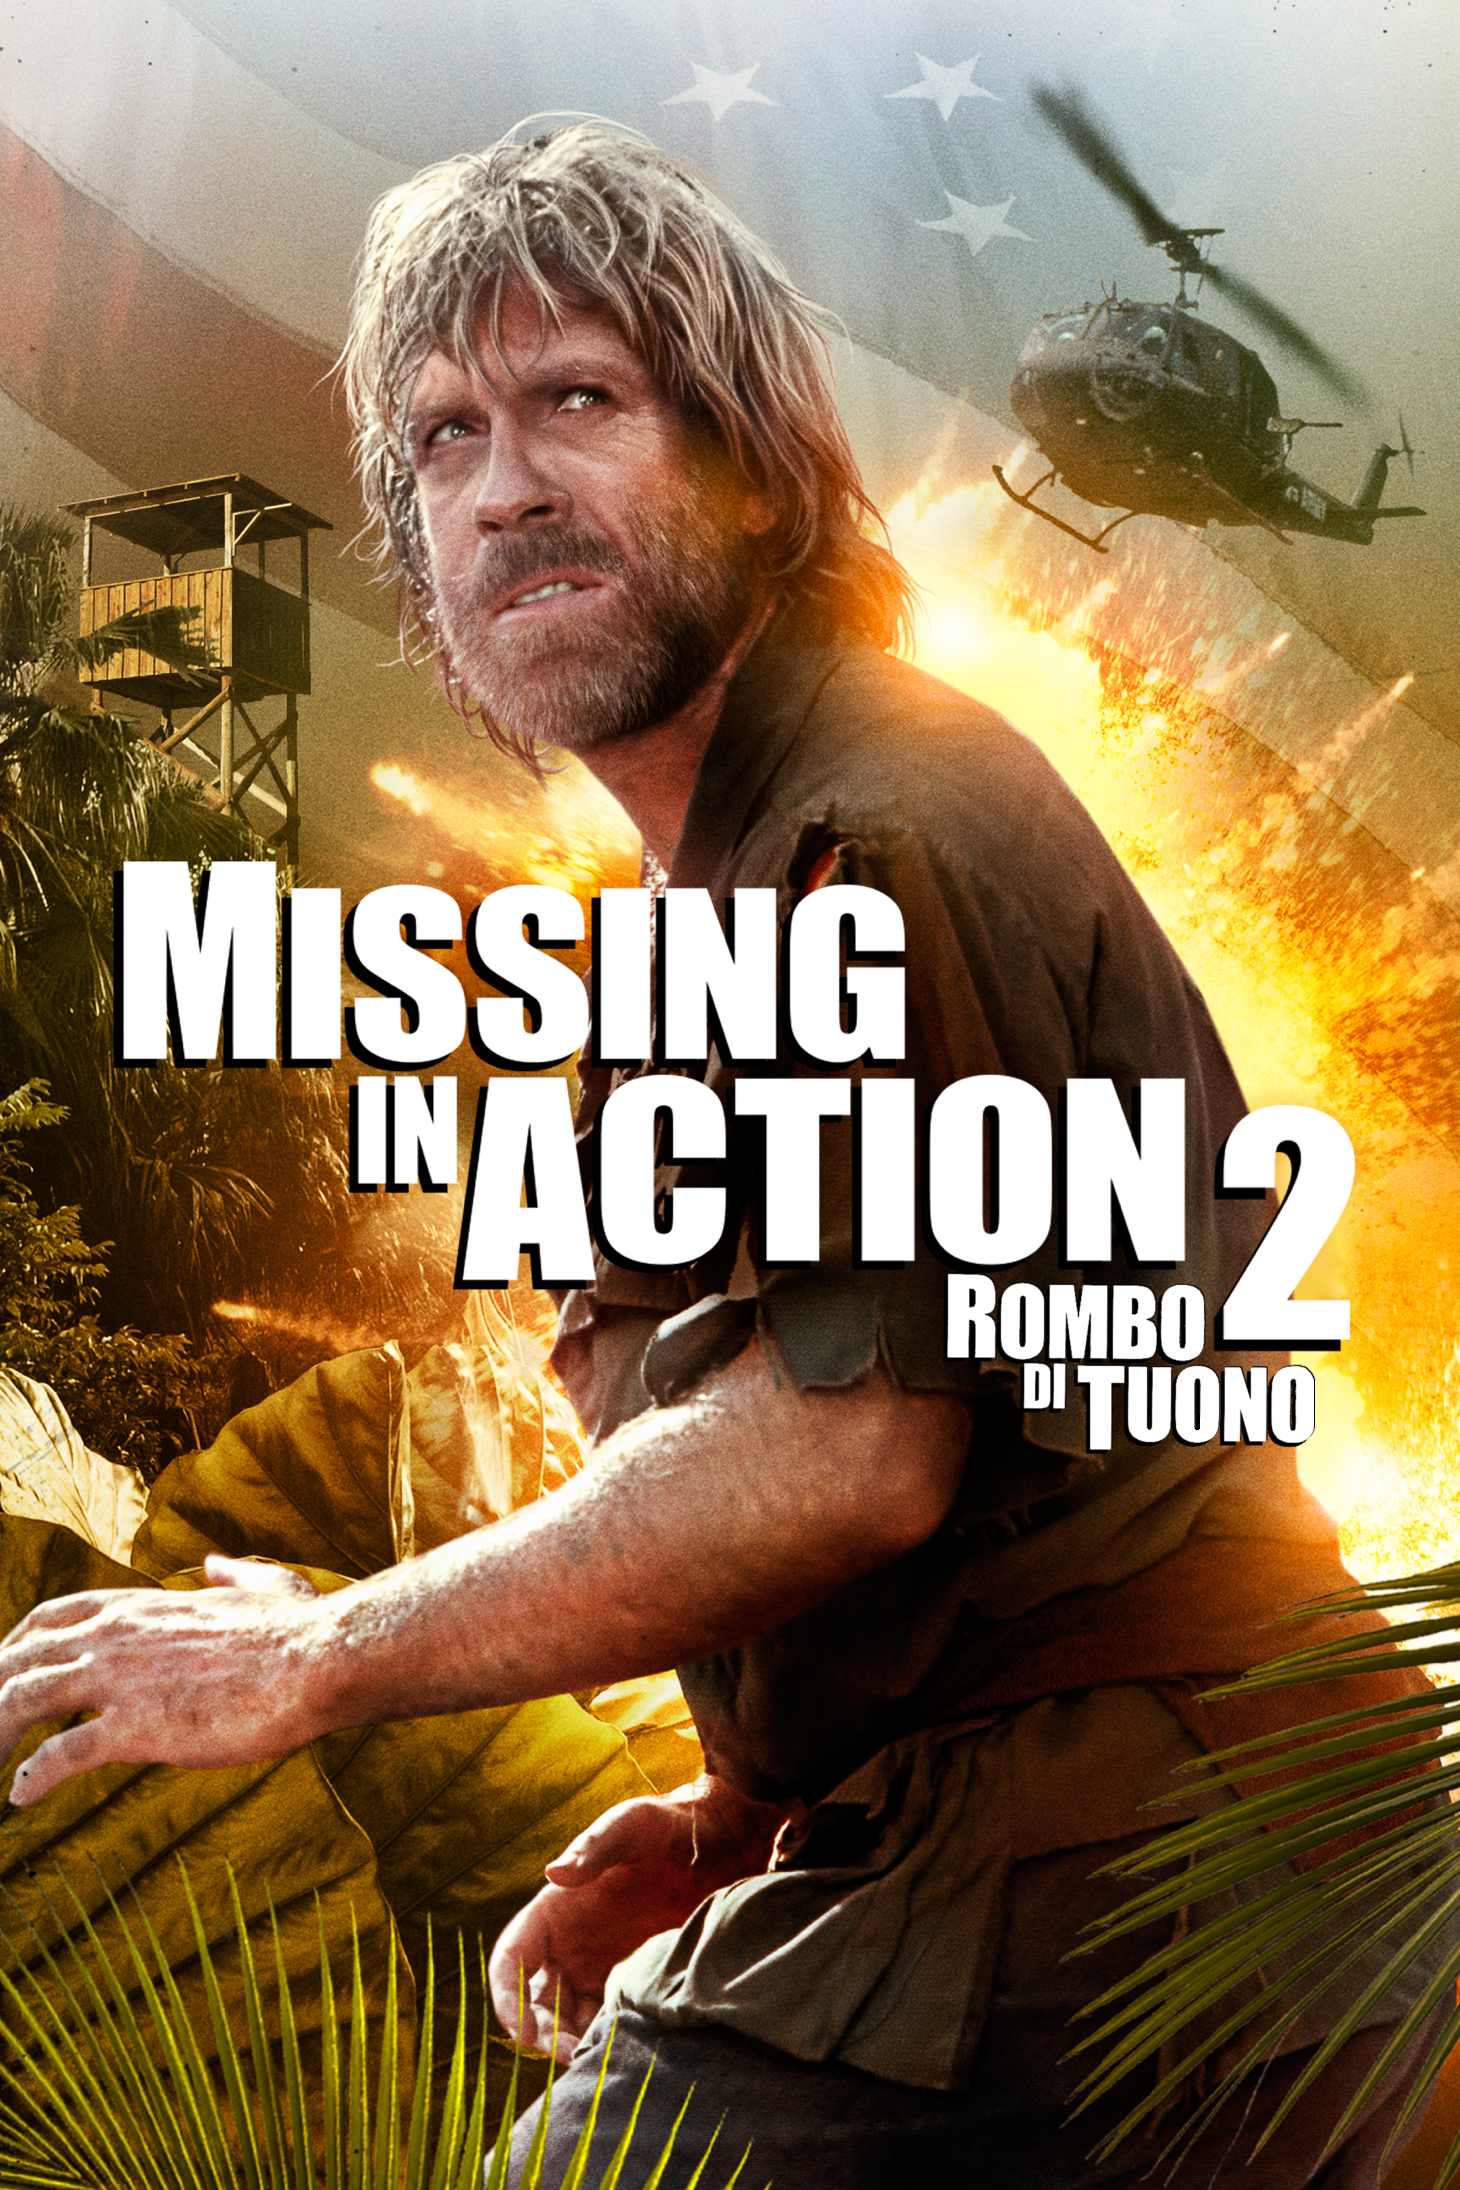 Rombo di tuono 2: Missing in Action 2 [HD] (1985)